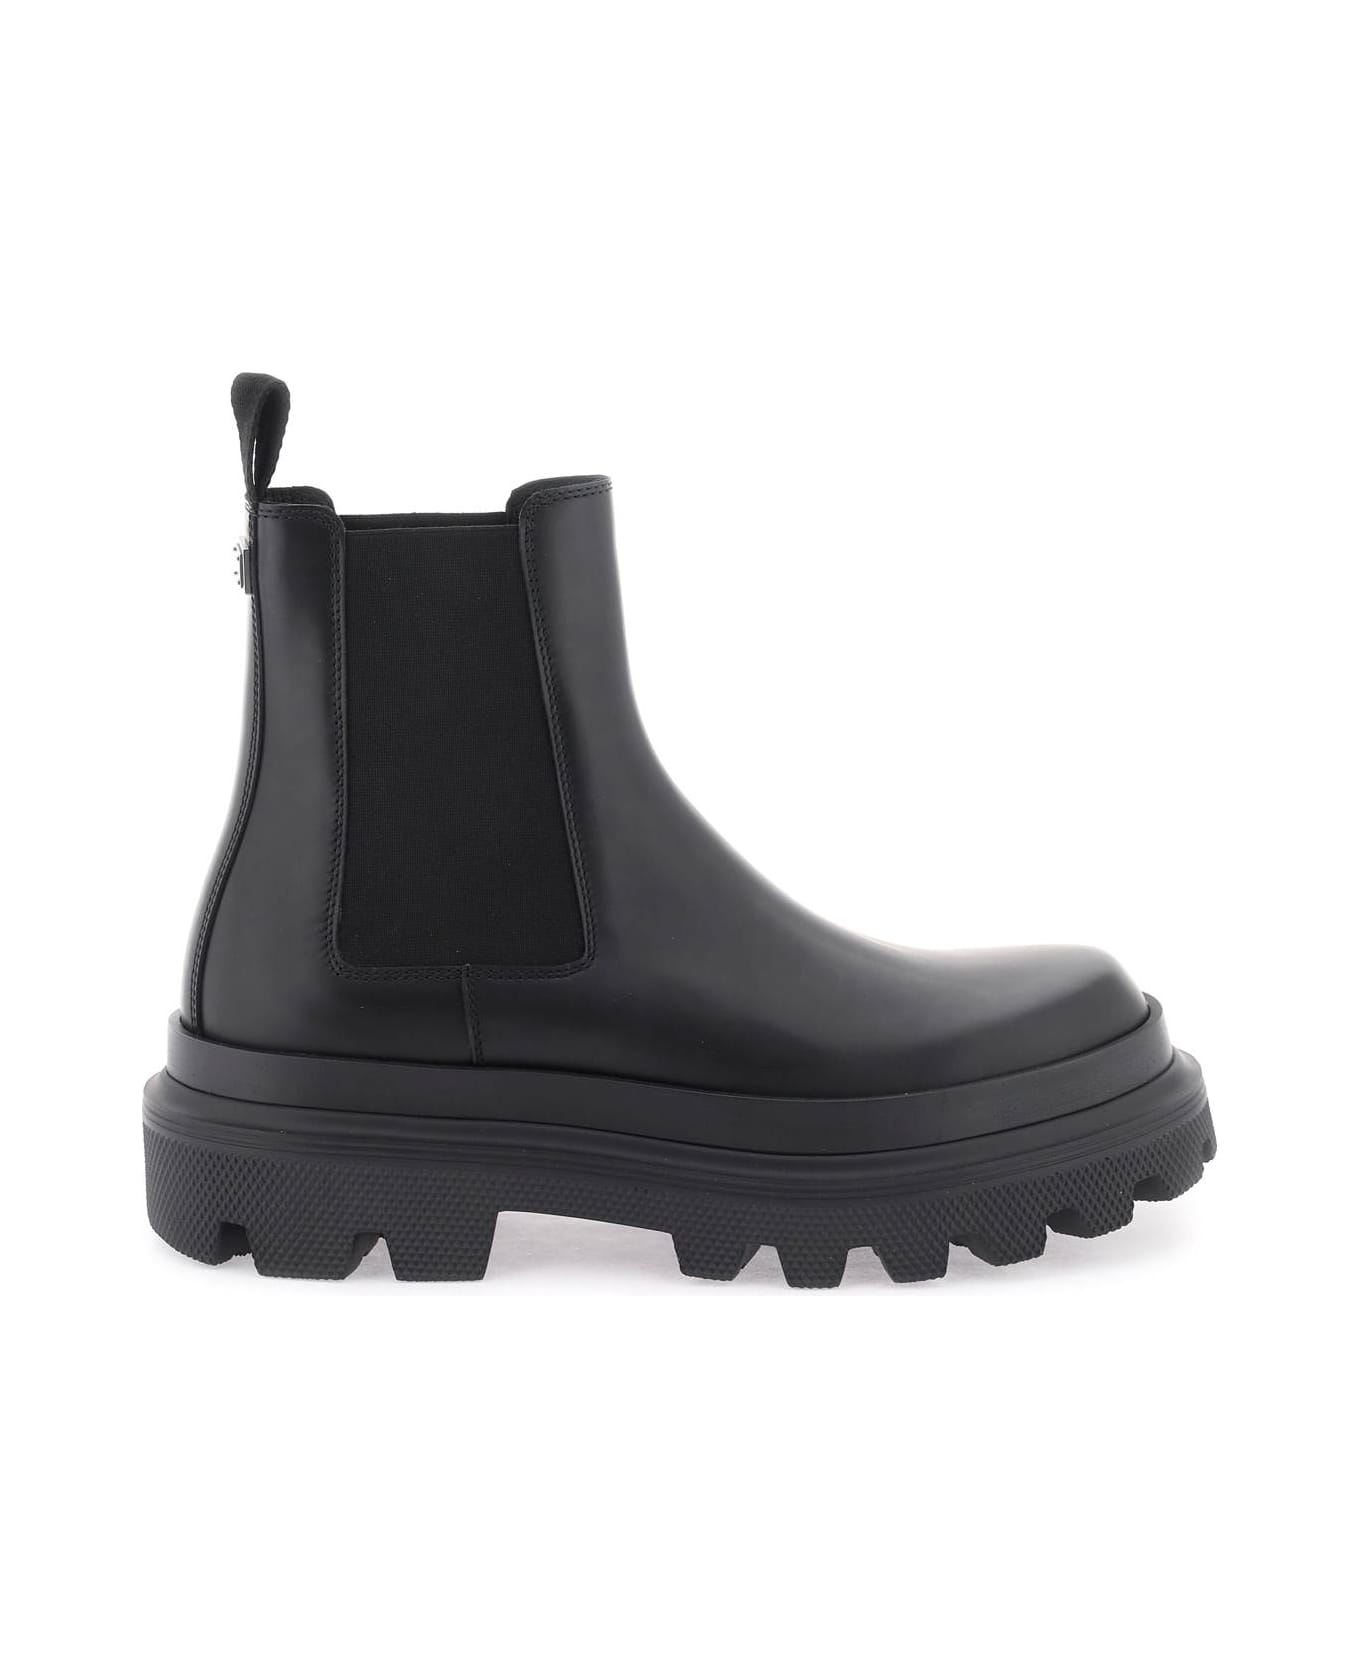 Dolce & Gabbana Chelsea Boots In Brushed Leather - black ブーツ